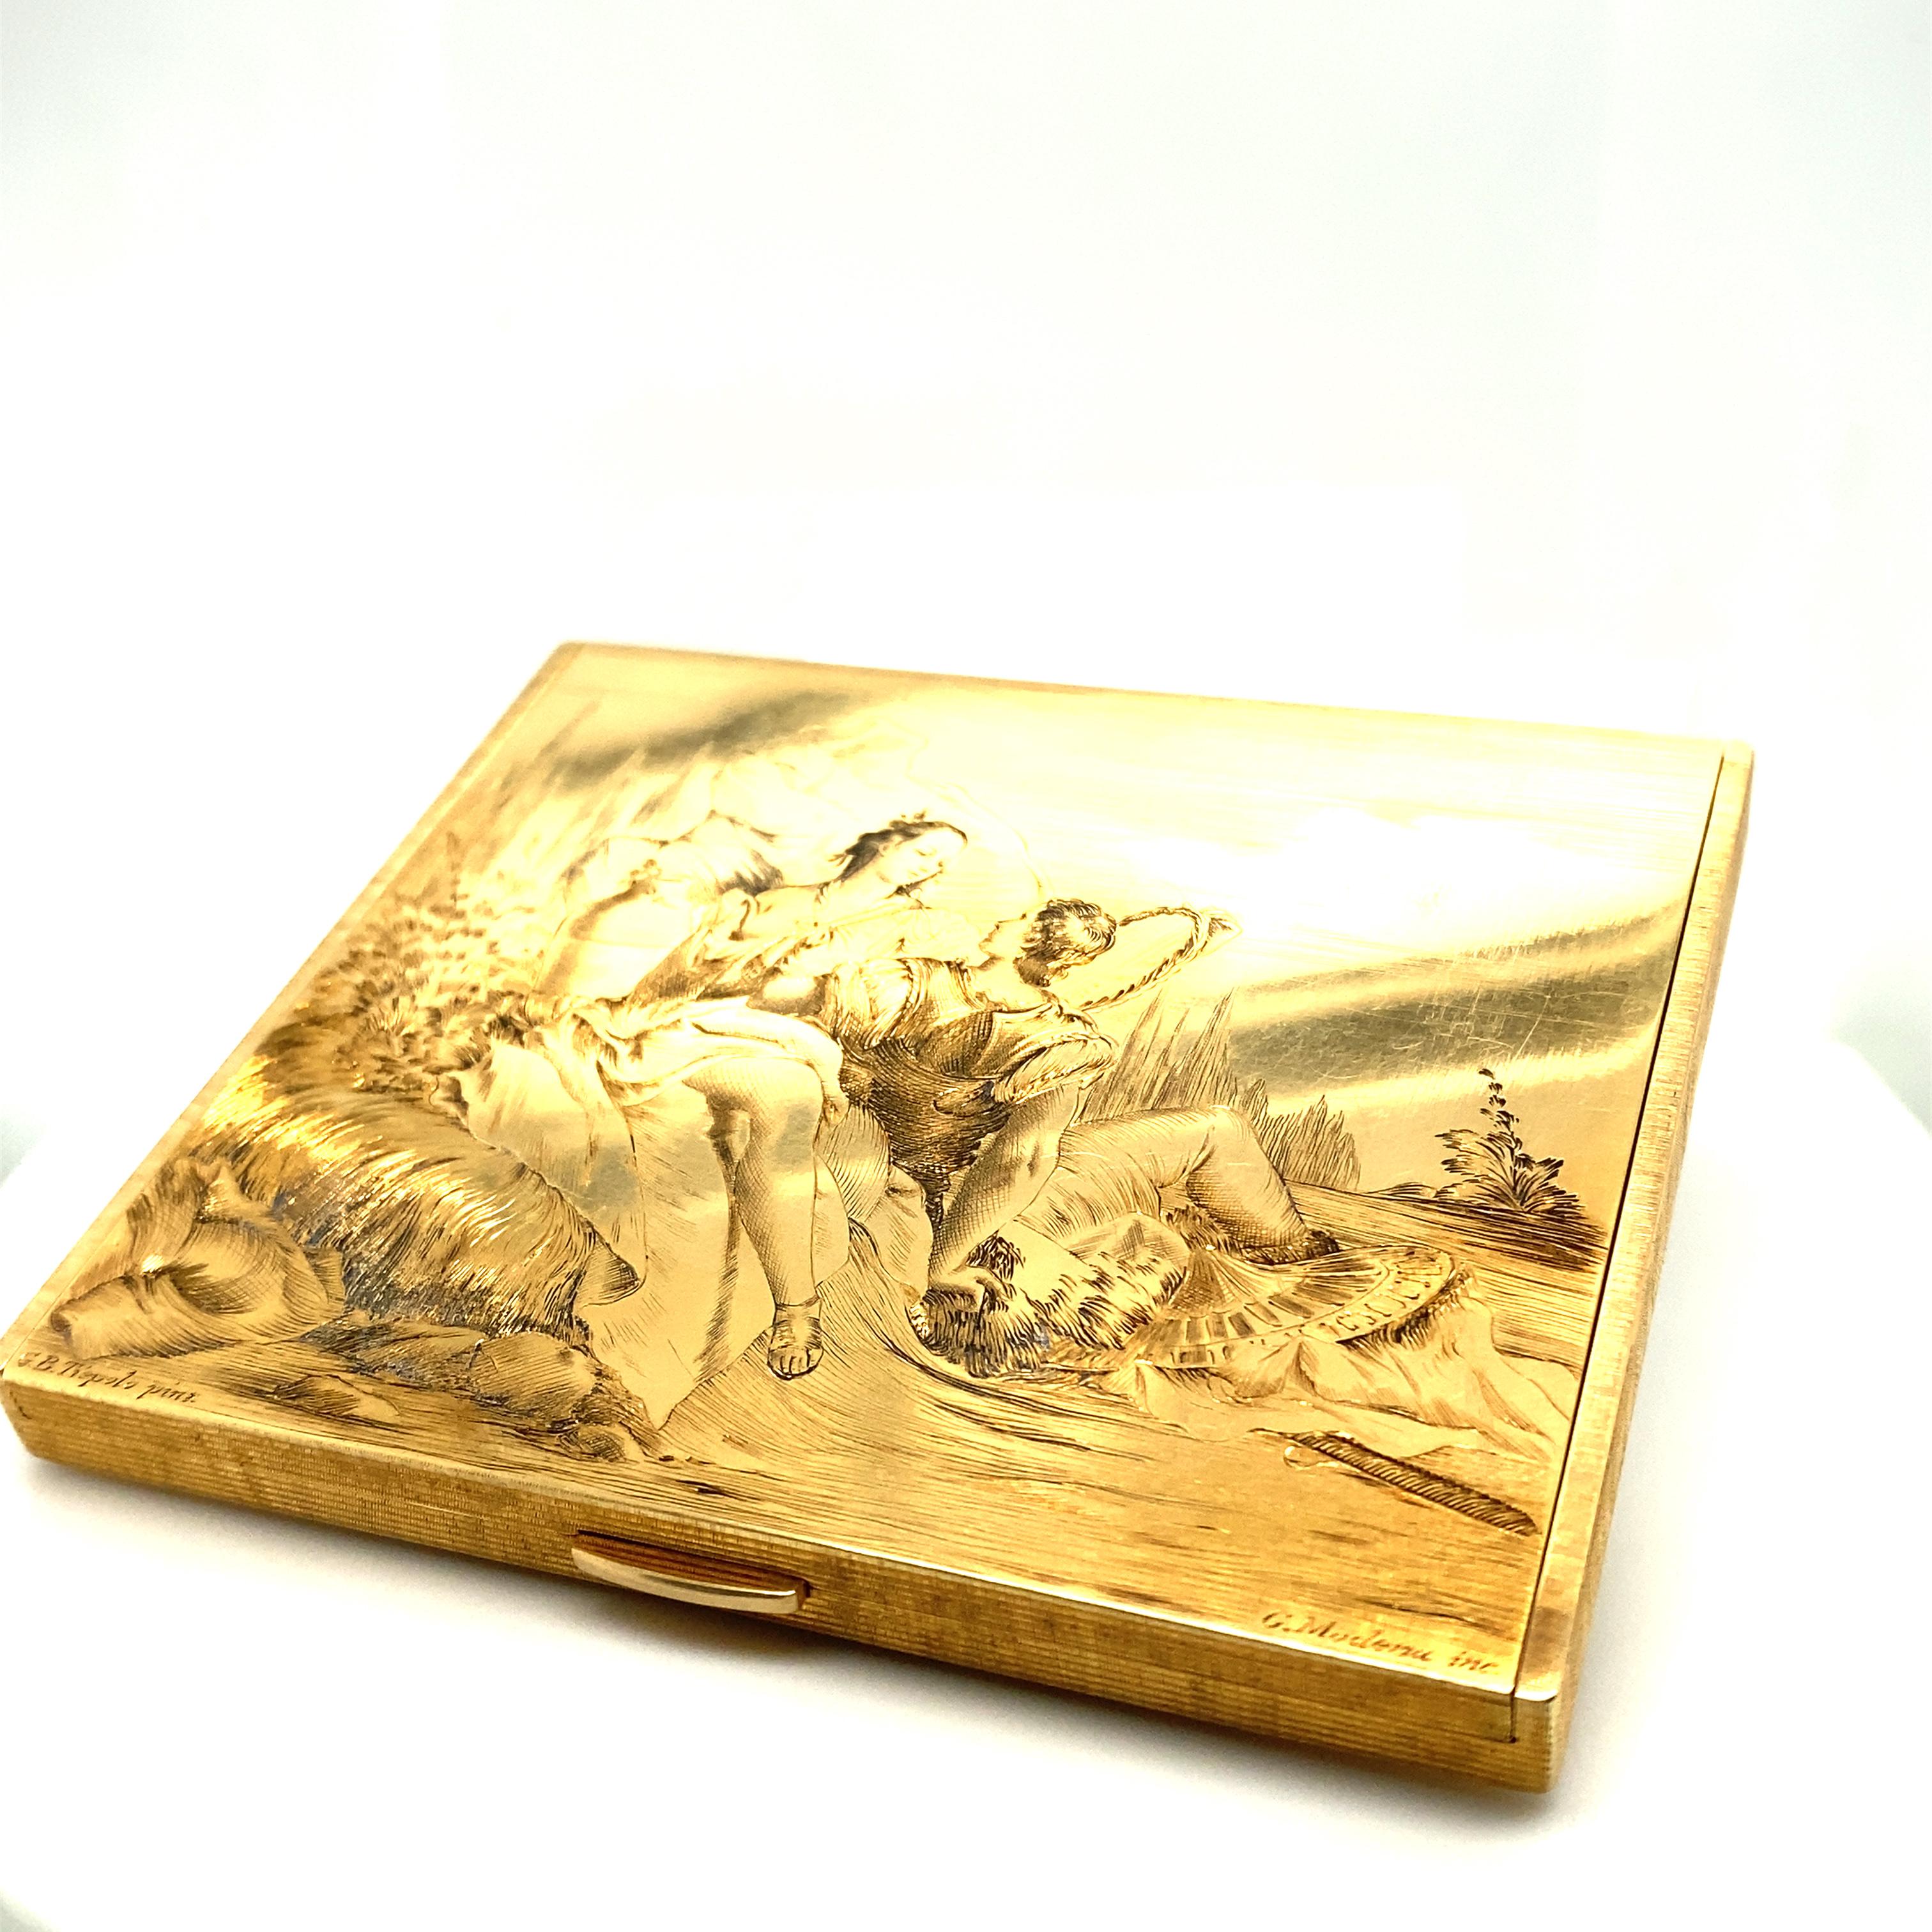 Hand engraved with a romantic scene of a young couple resting outside. The image takes reference to Giovanni Battista Tiepolo an eminent Venetian artist of the 18th Century. 

Exquisite hand engraving with partially blackened details

Dimensions: 93